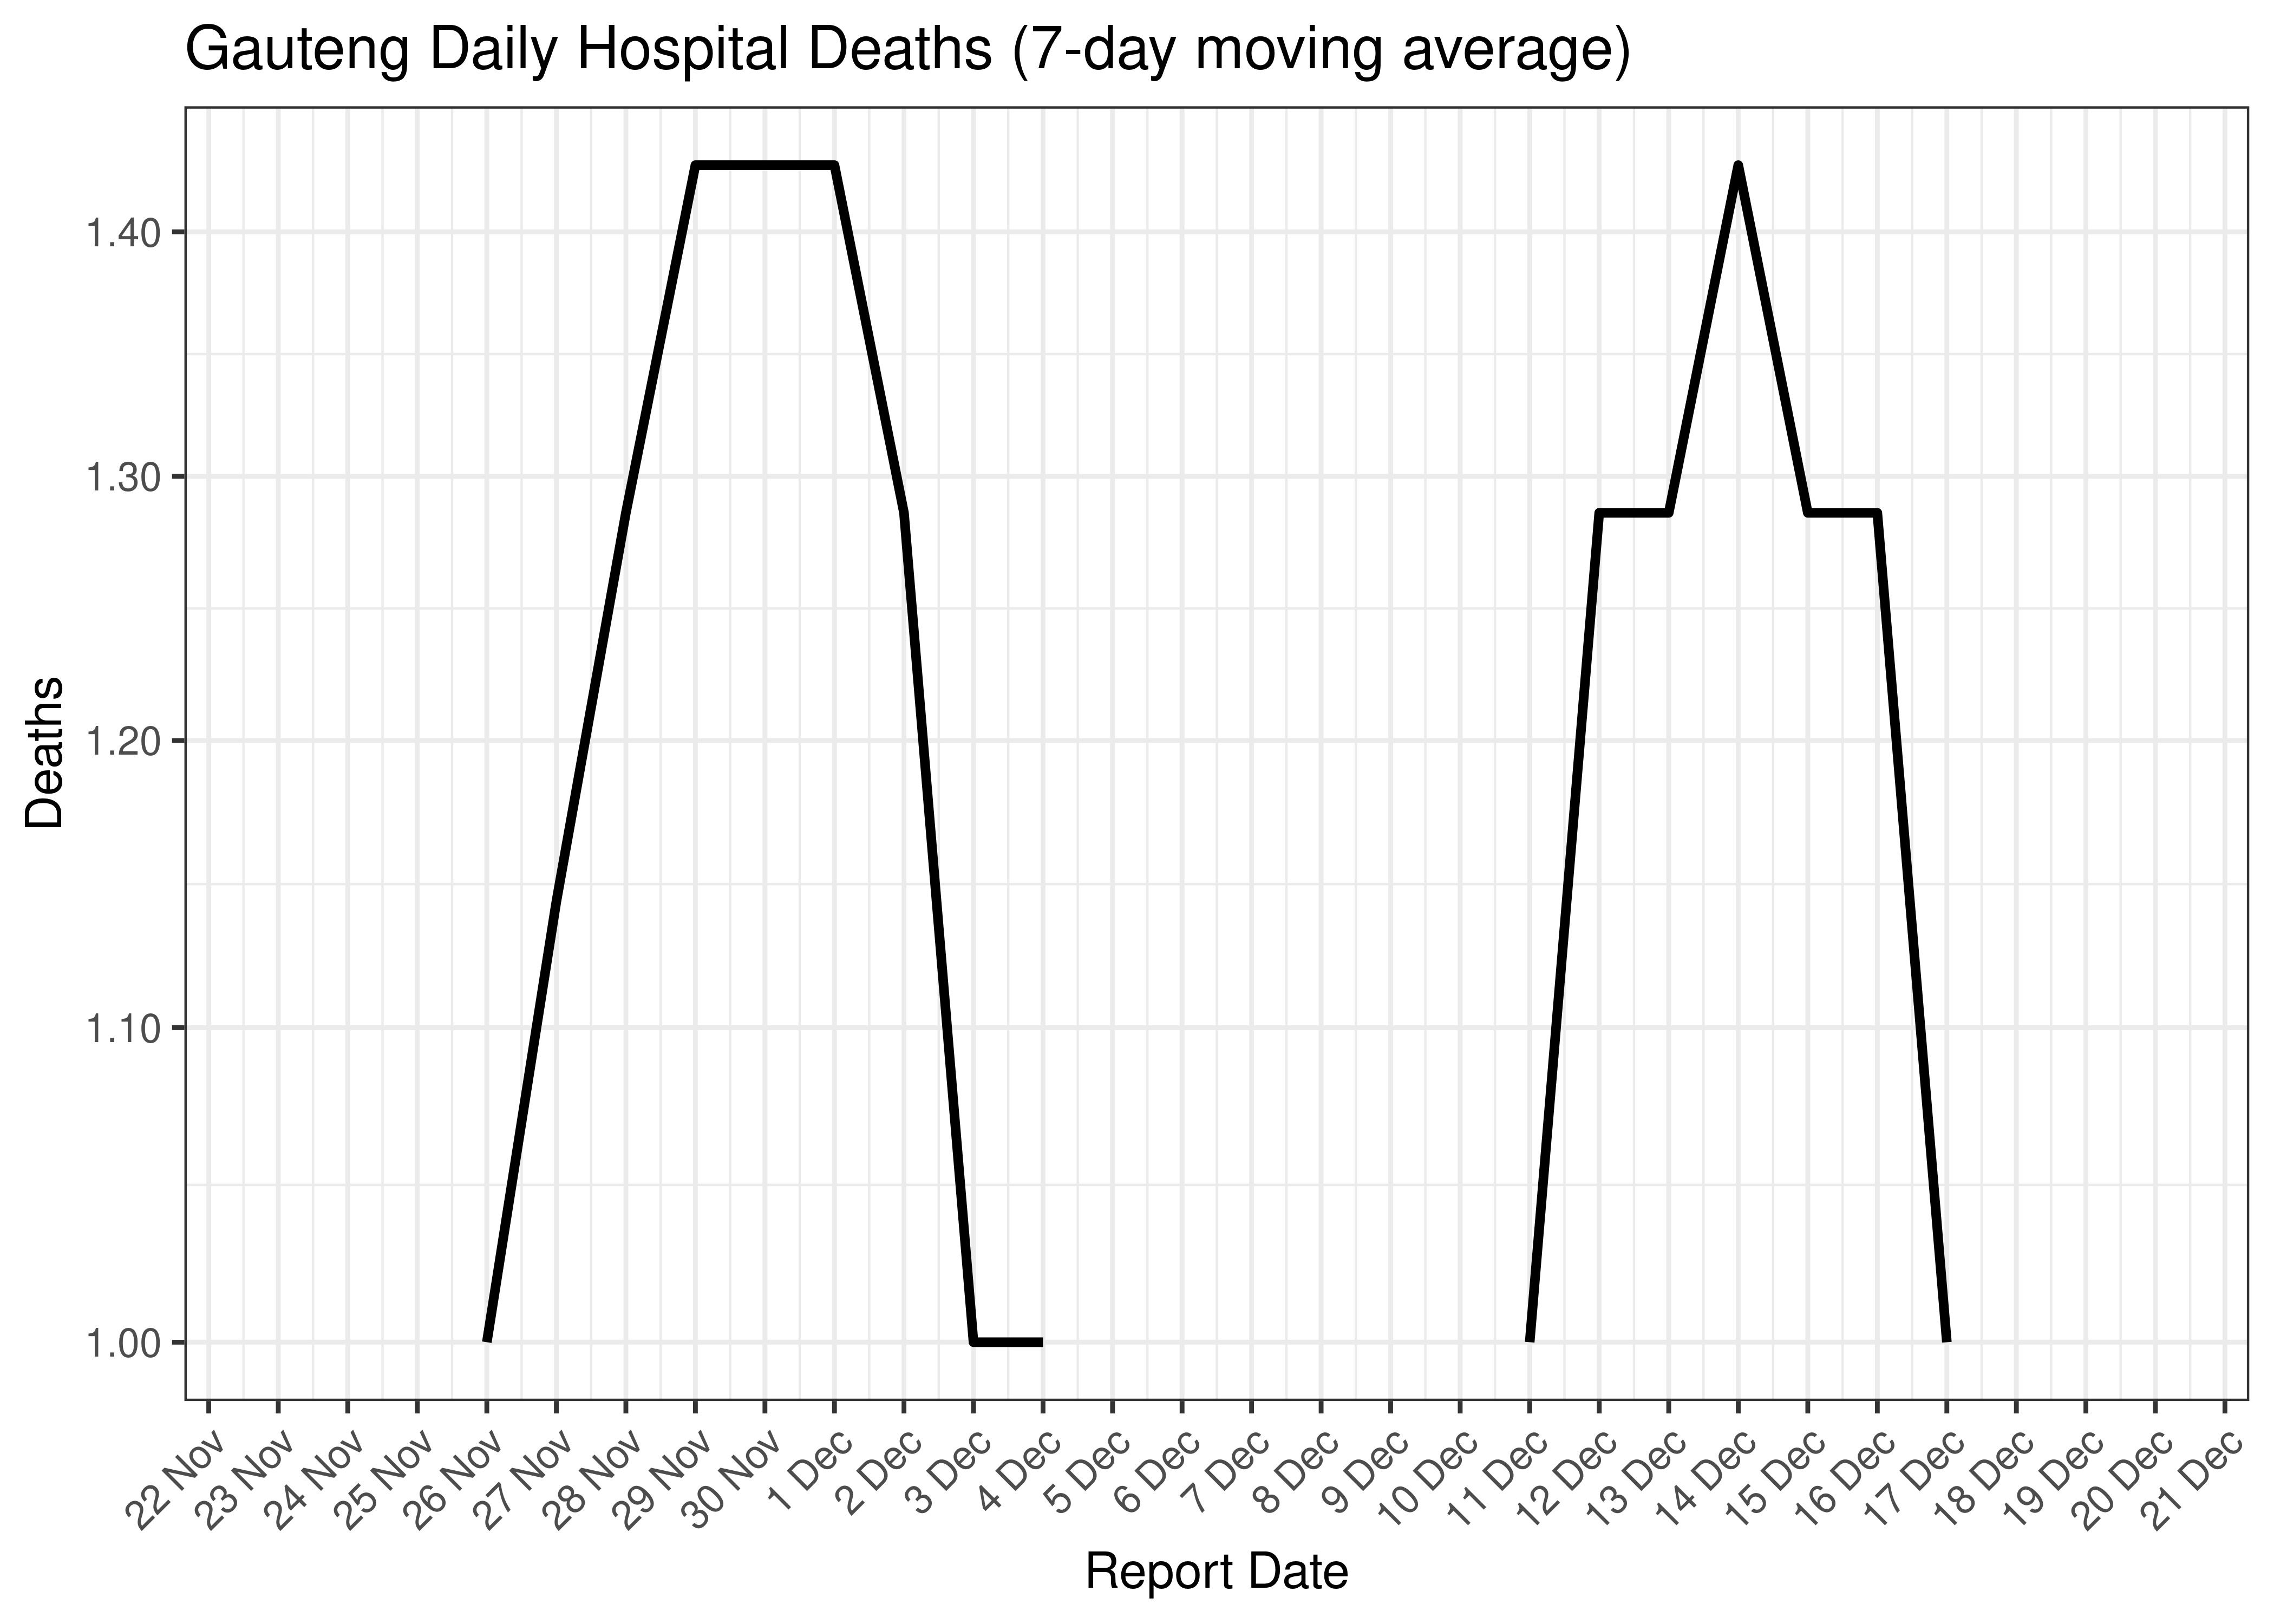 Gauteng Daily Hospital Deaths for Last 30-days (7-day moving average)